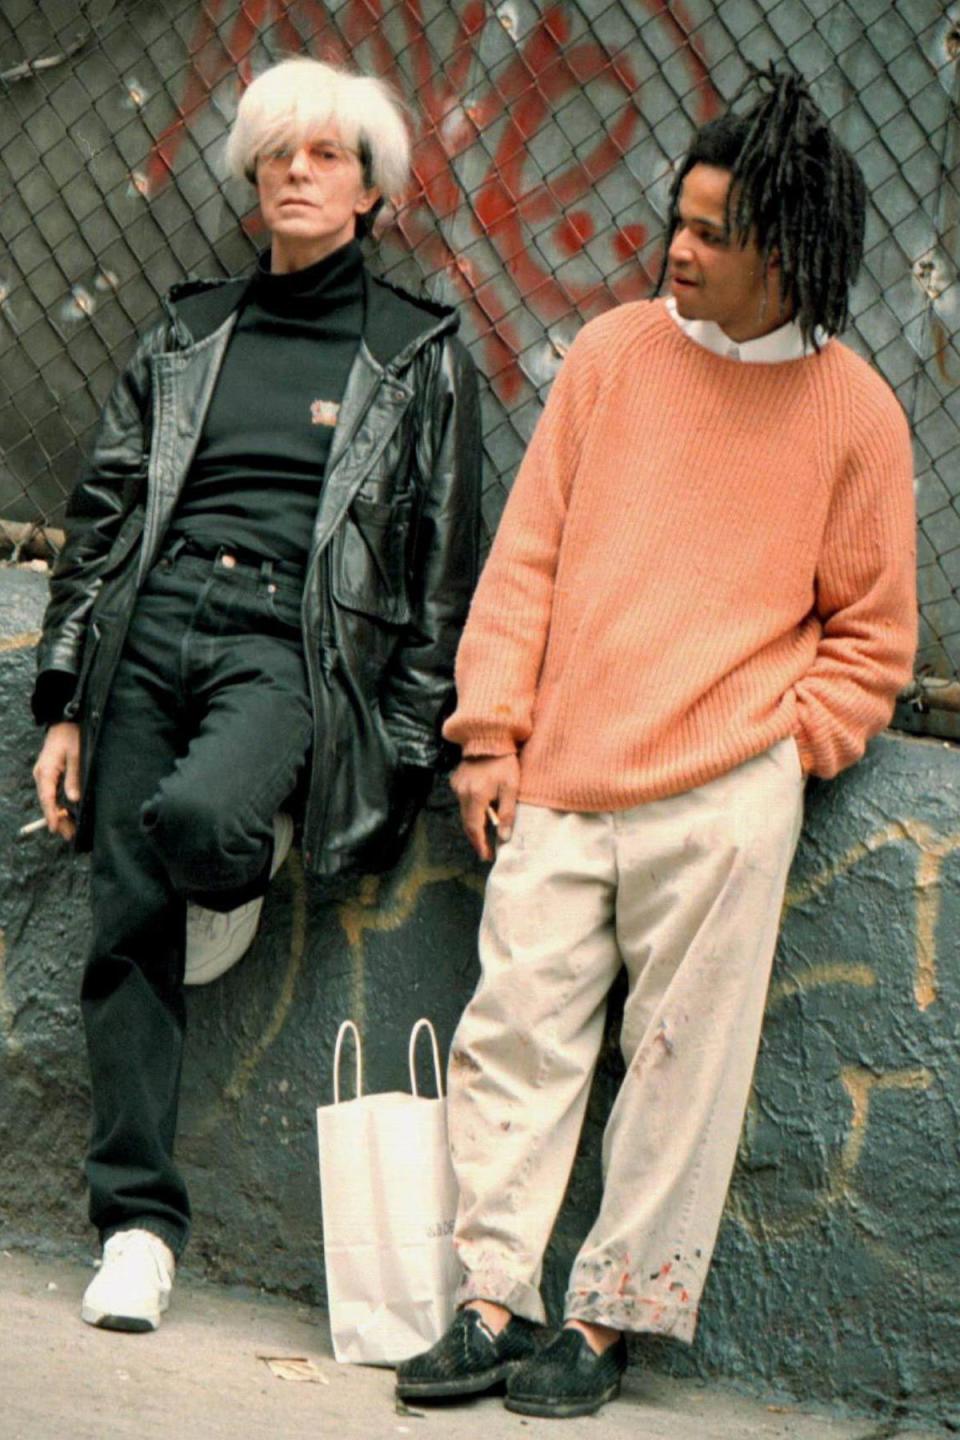 Arting around: David Bowie as Andy Warol and Wright as Jean-Michel Basquiat on the set of the 1996 biopic ‘Basquiat’ (Shutterstock)